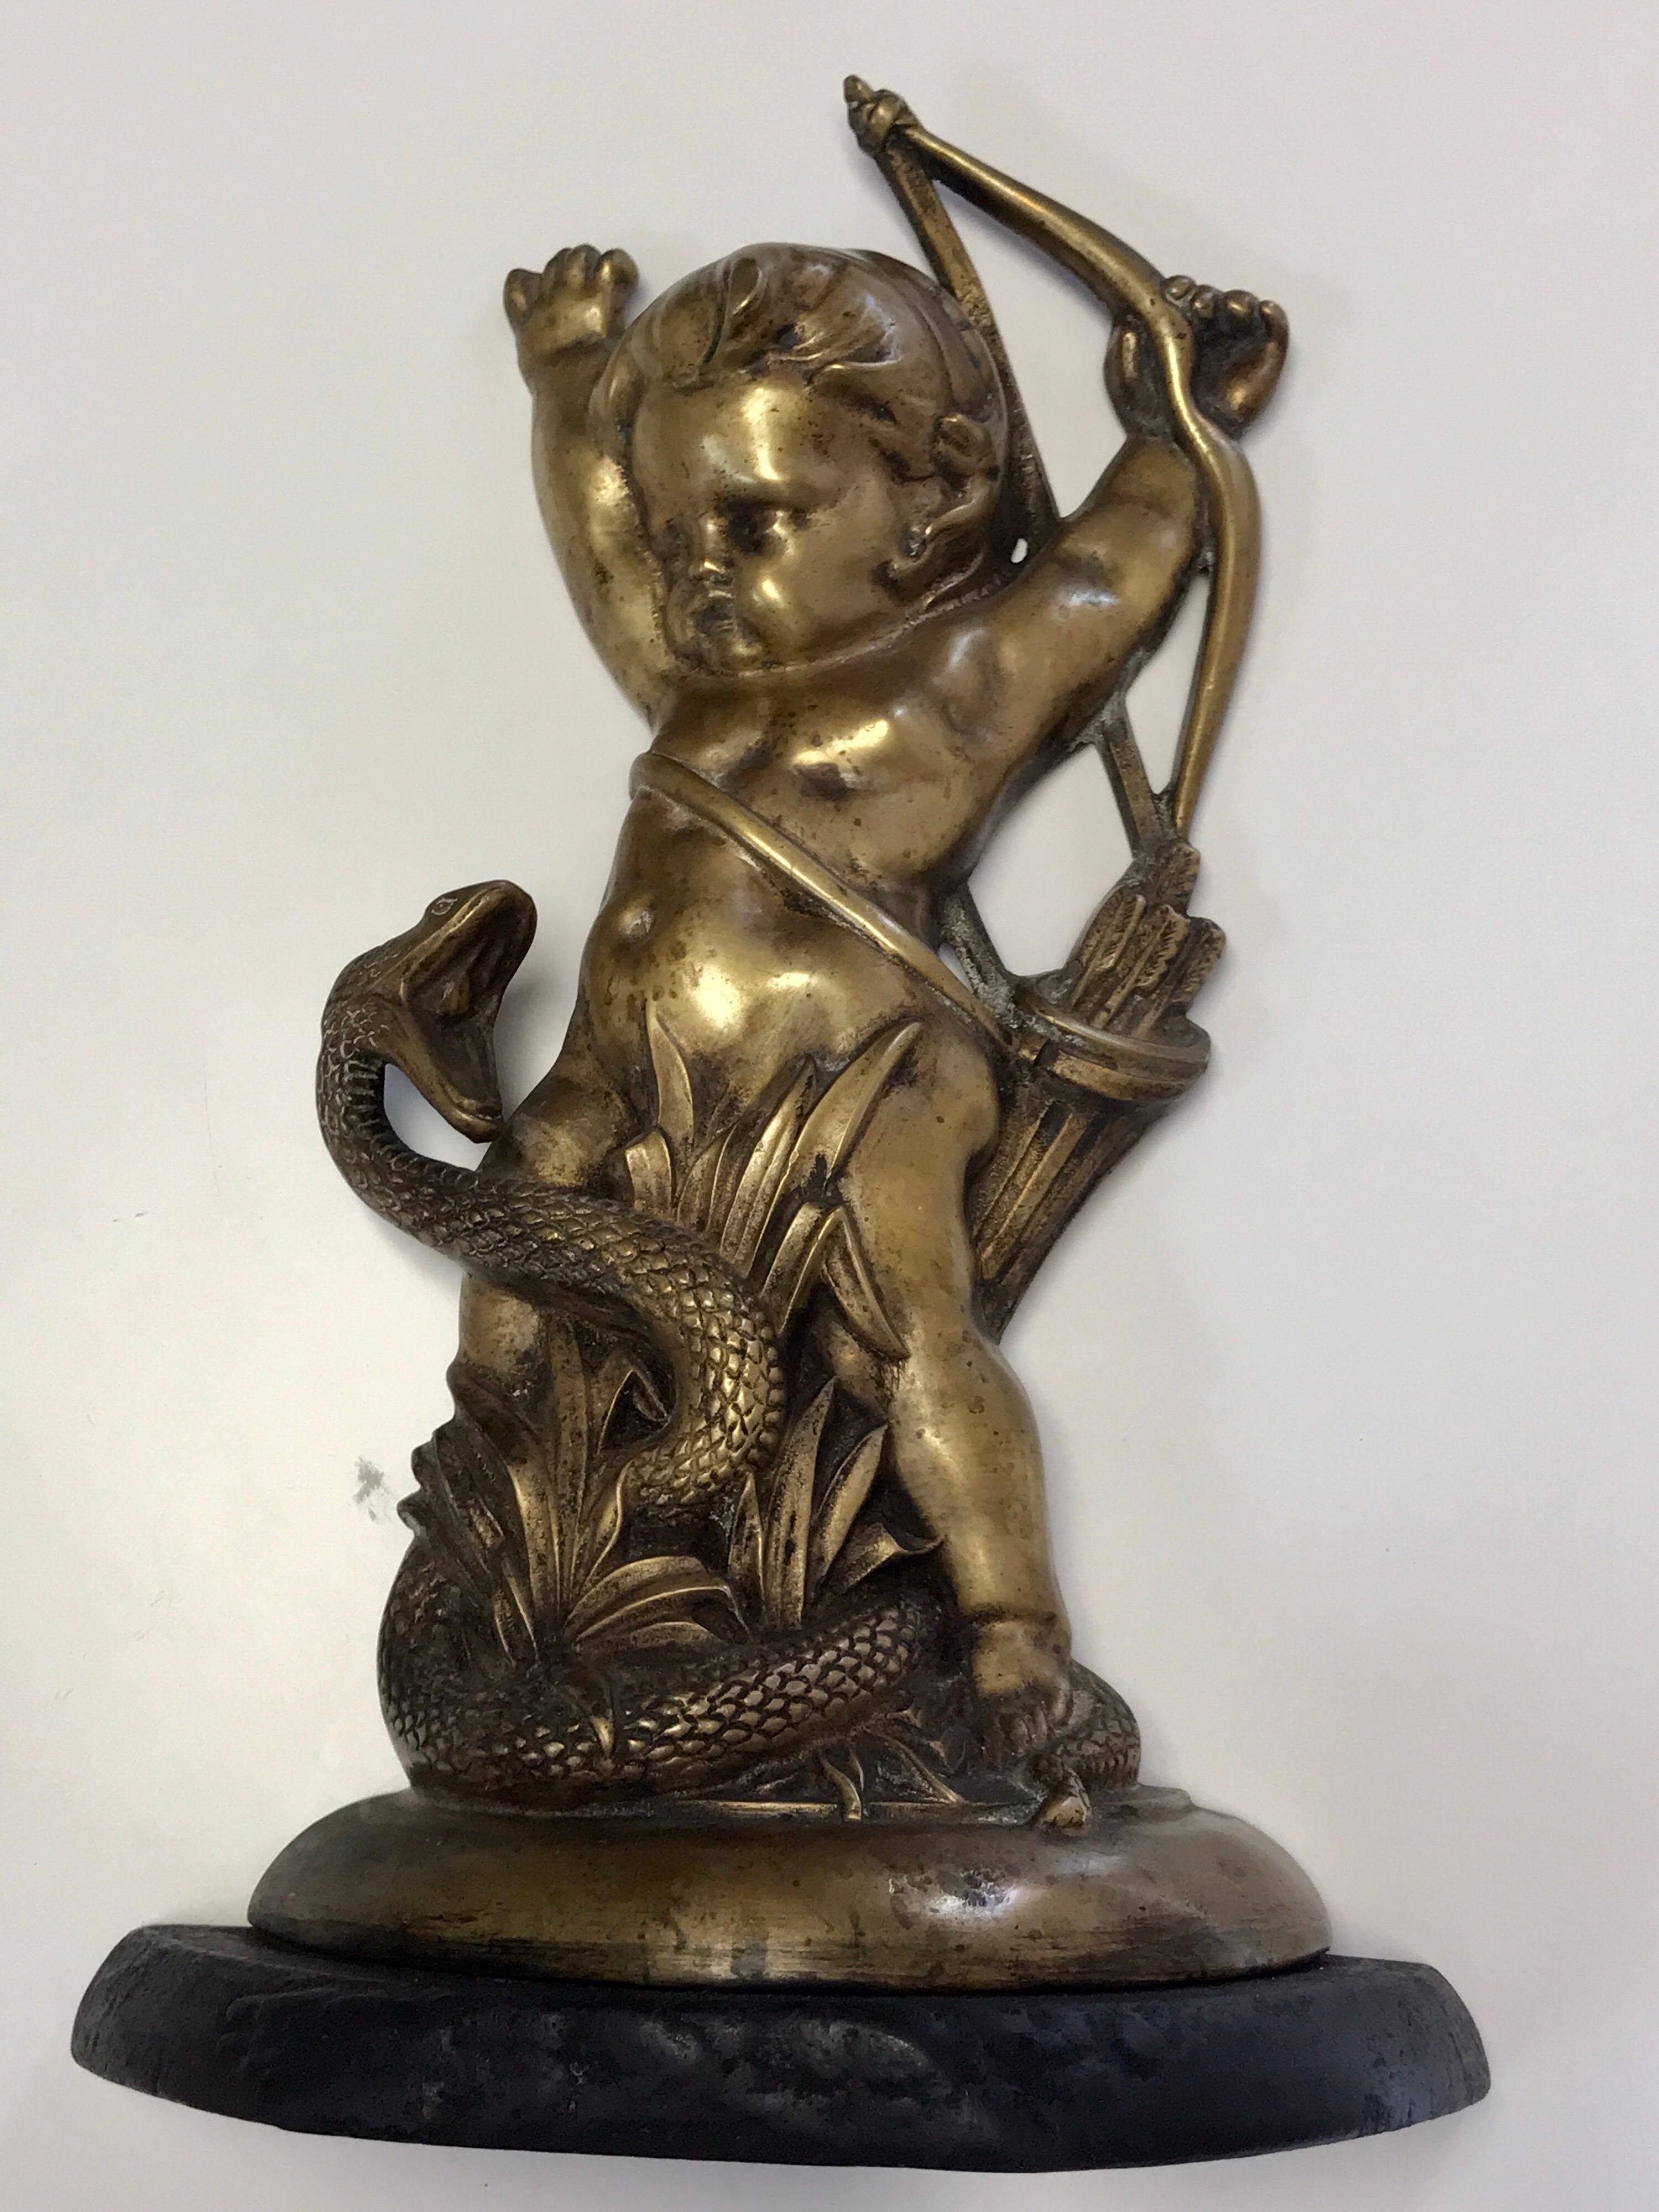 Antique English brass and iron cupid with serpent doorstop, finely cast, stamped: Rd No 530354 on back, raised on a cast iron demilune base.